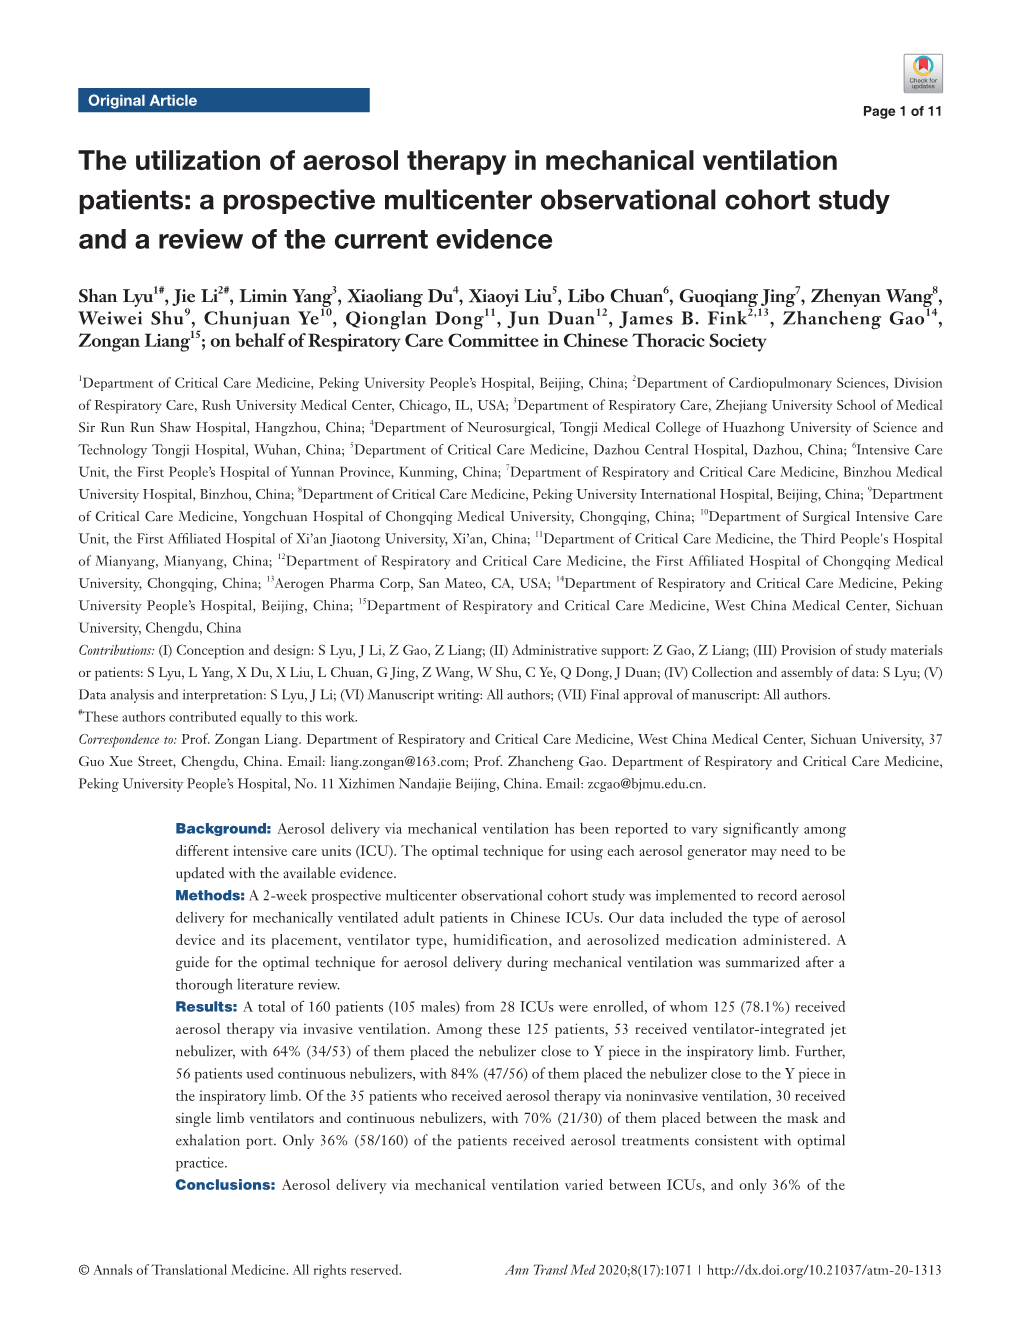 The Utilization of Aerosol Therapy in Mechanical Ventilation Patients: a Prospective Multicenter Observational Cohort Study and a Review of the Current Evidence